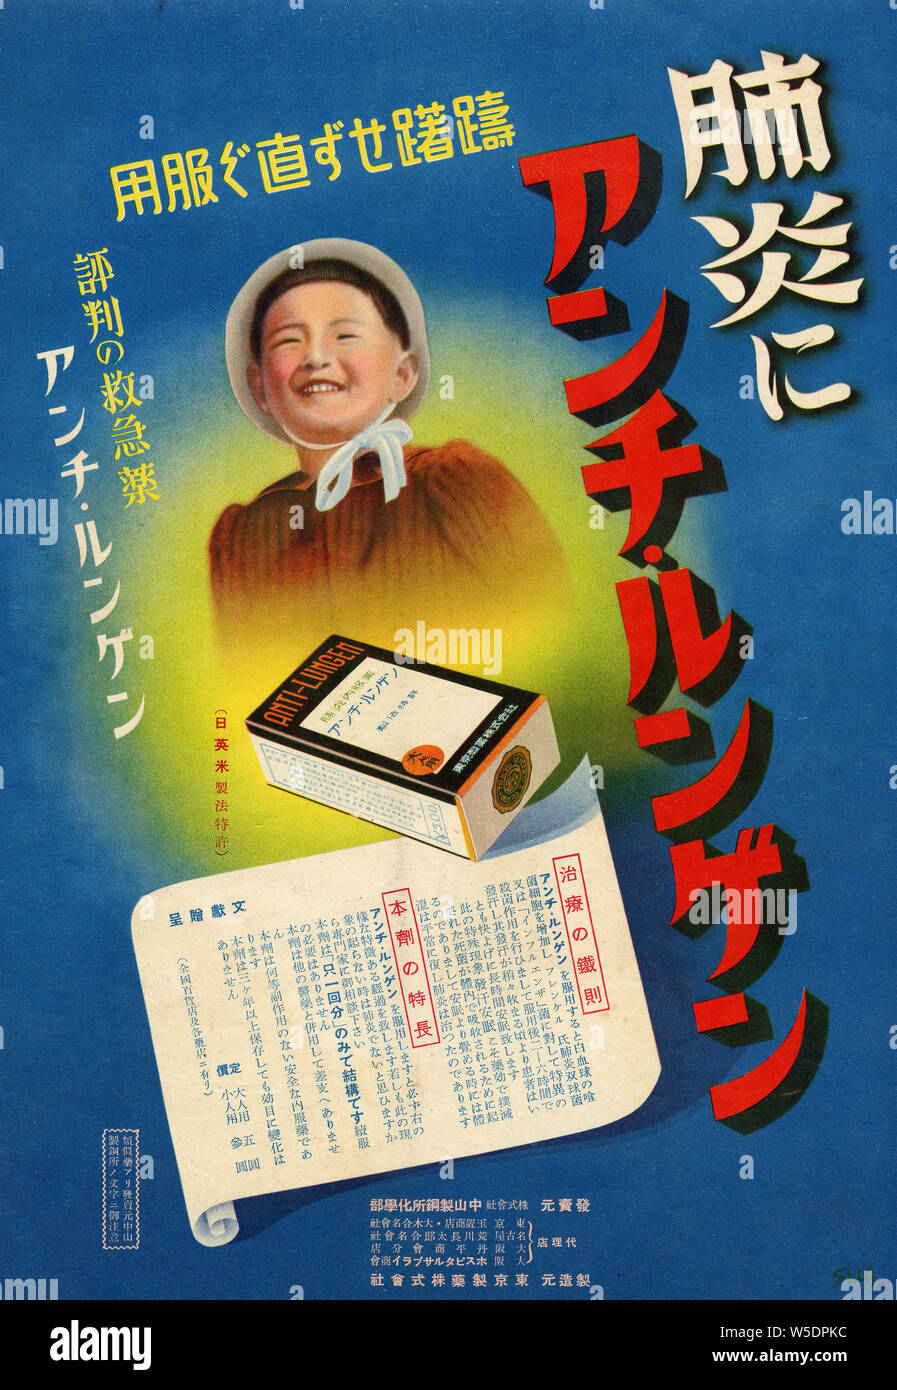 Historical Japanese advertisement poster featuring a child and medicinal product claims